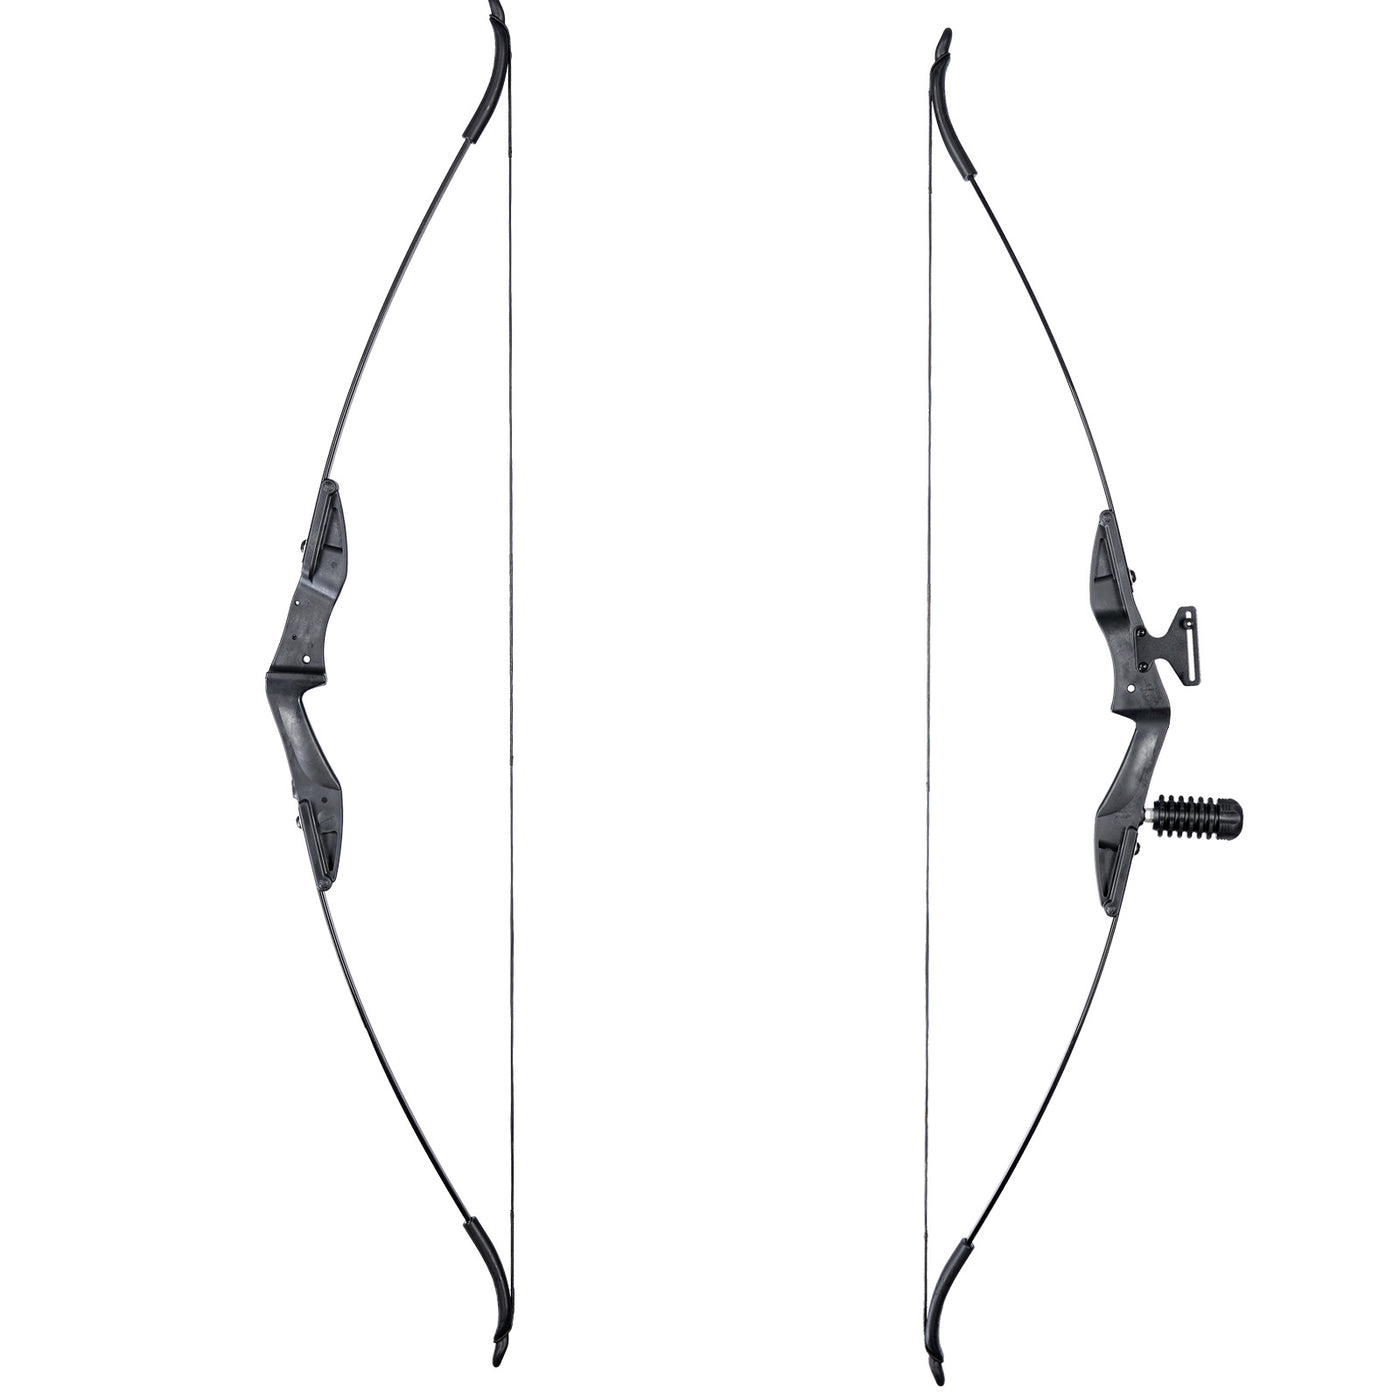 30/40lbs Archery Recurve Bow with 12x Carbon Arrows Tube Quiver Paper Practice Target Hiking